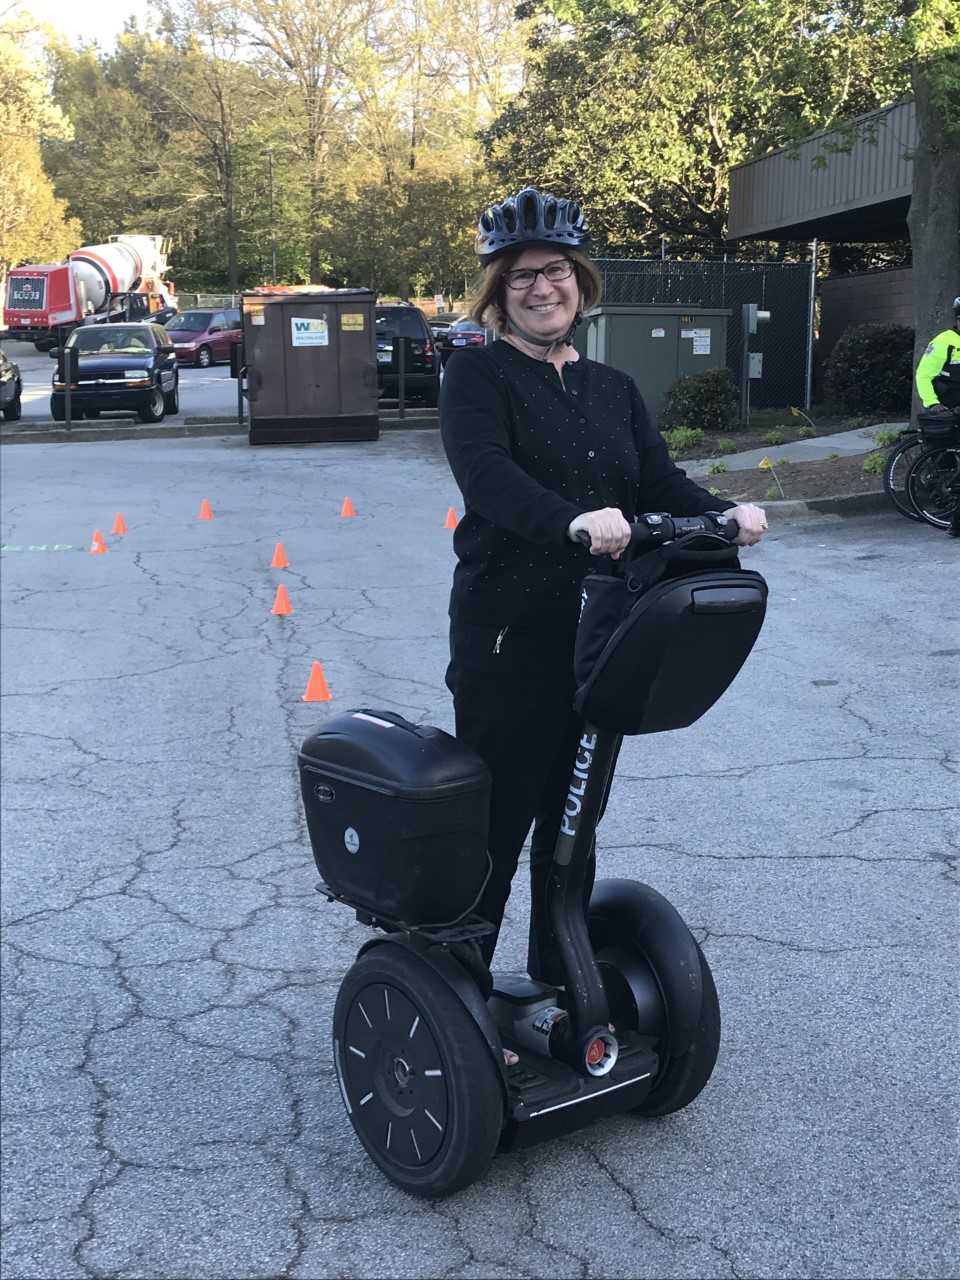 Brenda Morris, a graduate of the Citizen's Police Academy, learns to ride a Segway as part of the training.